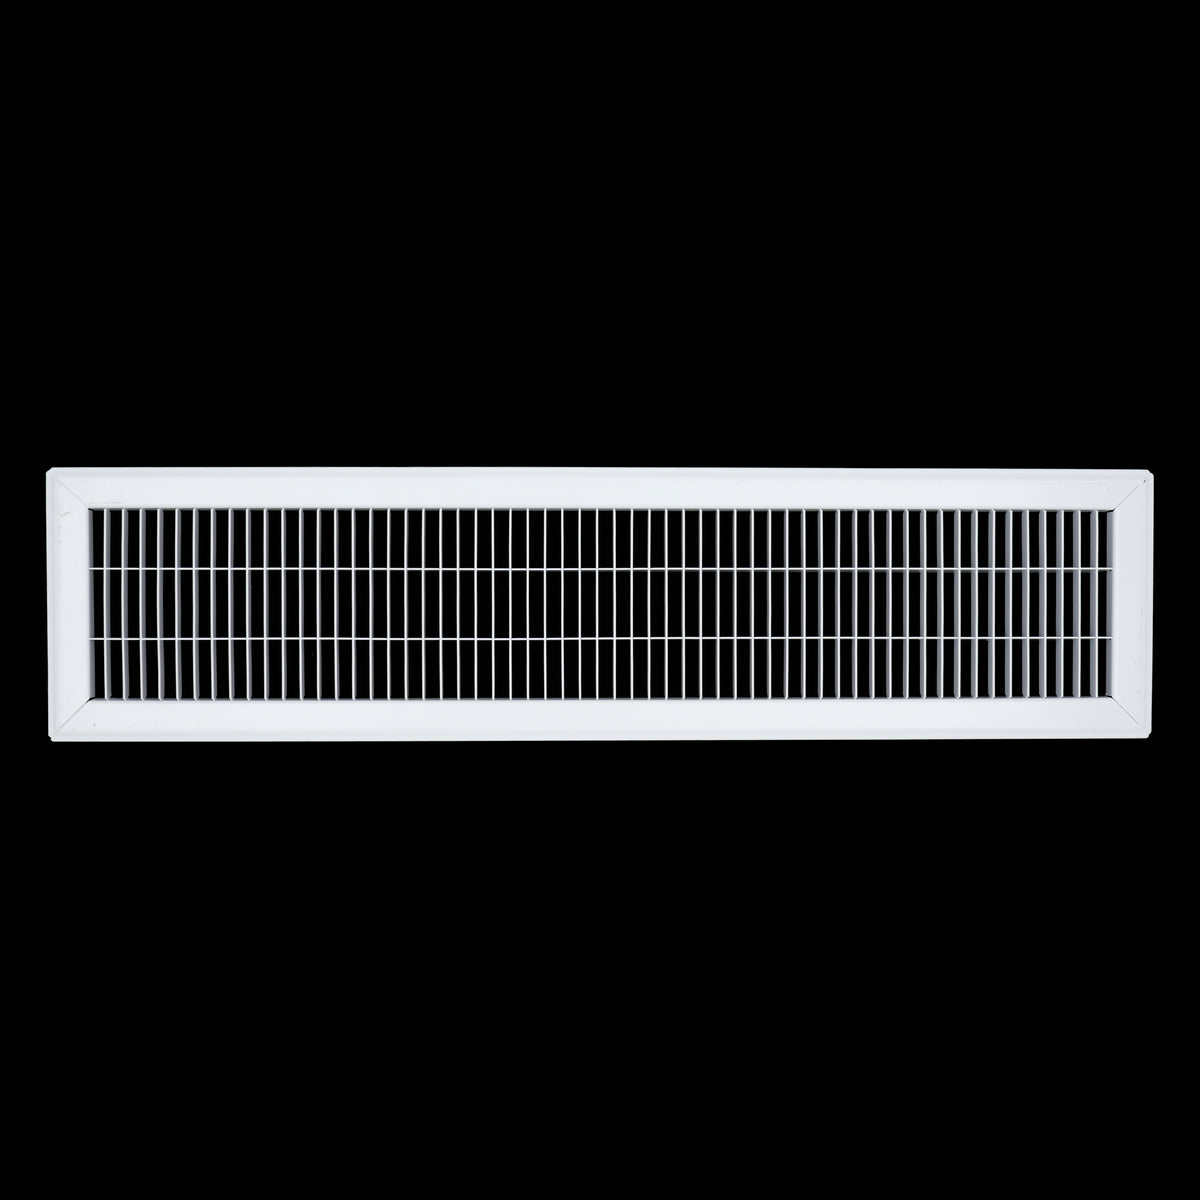 6"W x 30"H [Duct Opening] Return Air Floor Grille | Vent Cover Grill for Floor - White| Outer Dimensions: 7.75"W X 31.75"H